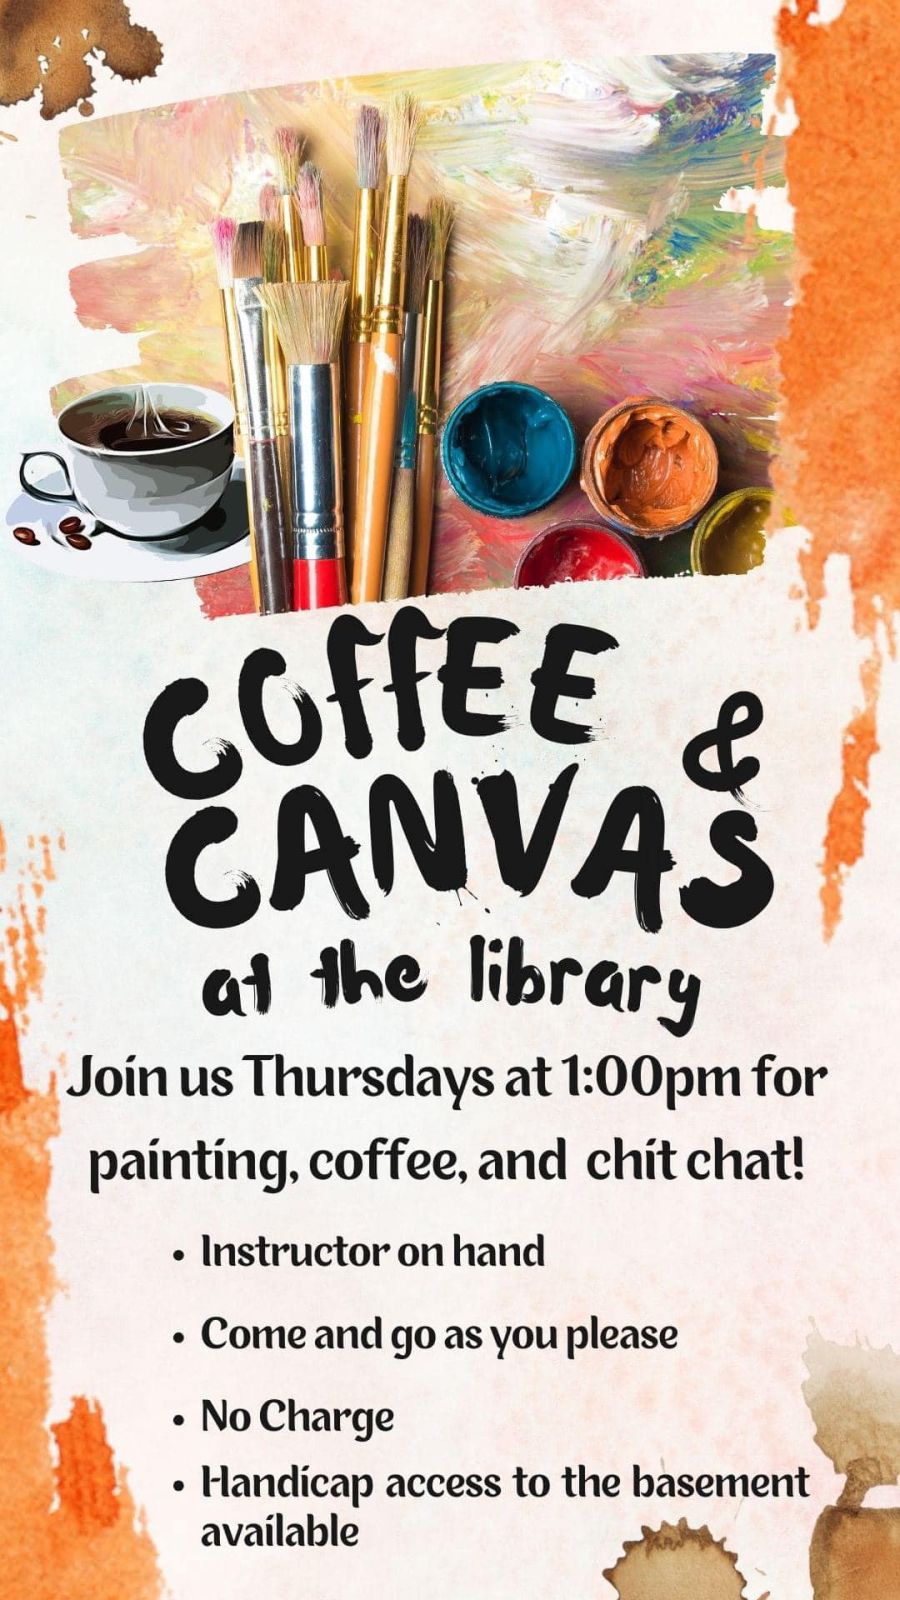 Event Promo Photo For Coffee and Canvas at the Library